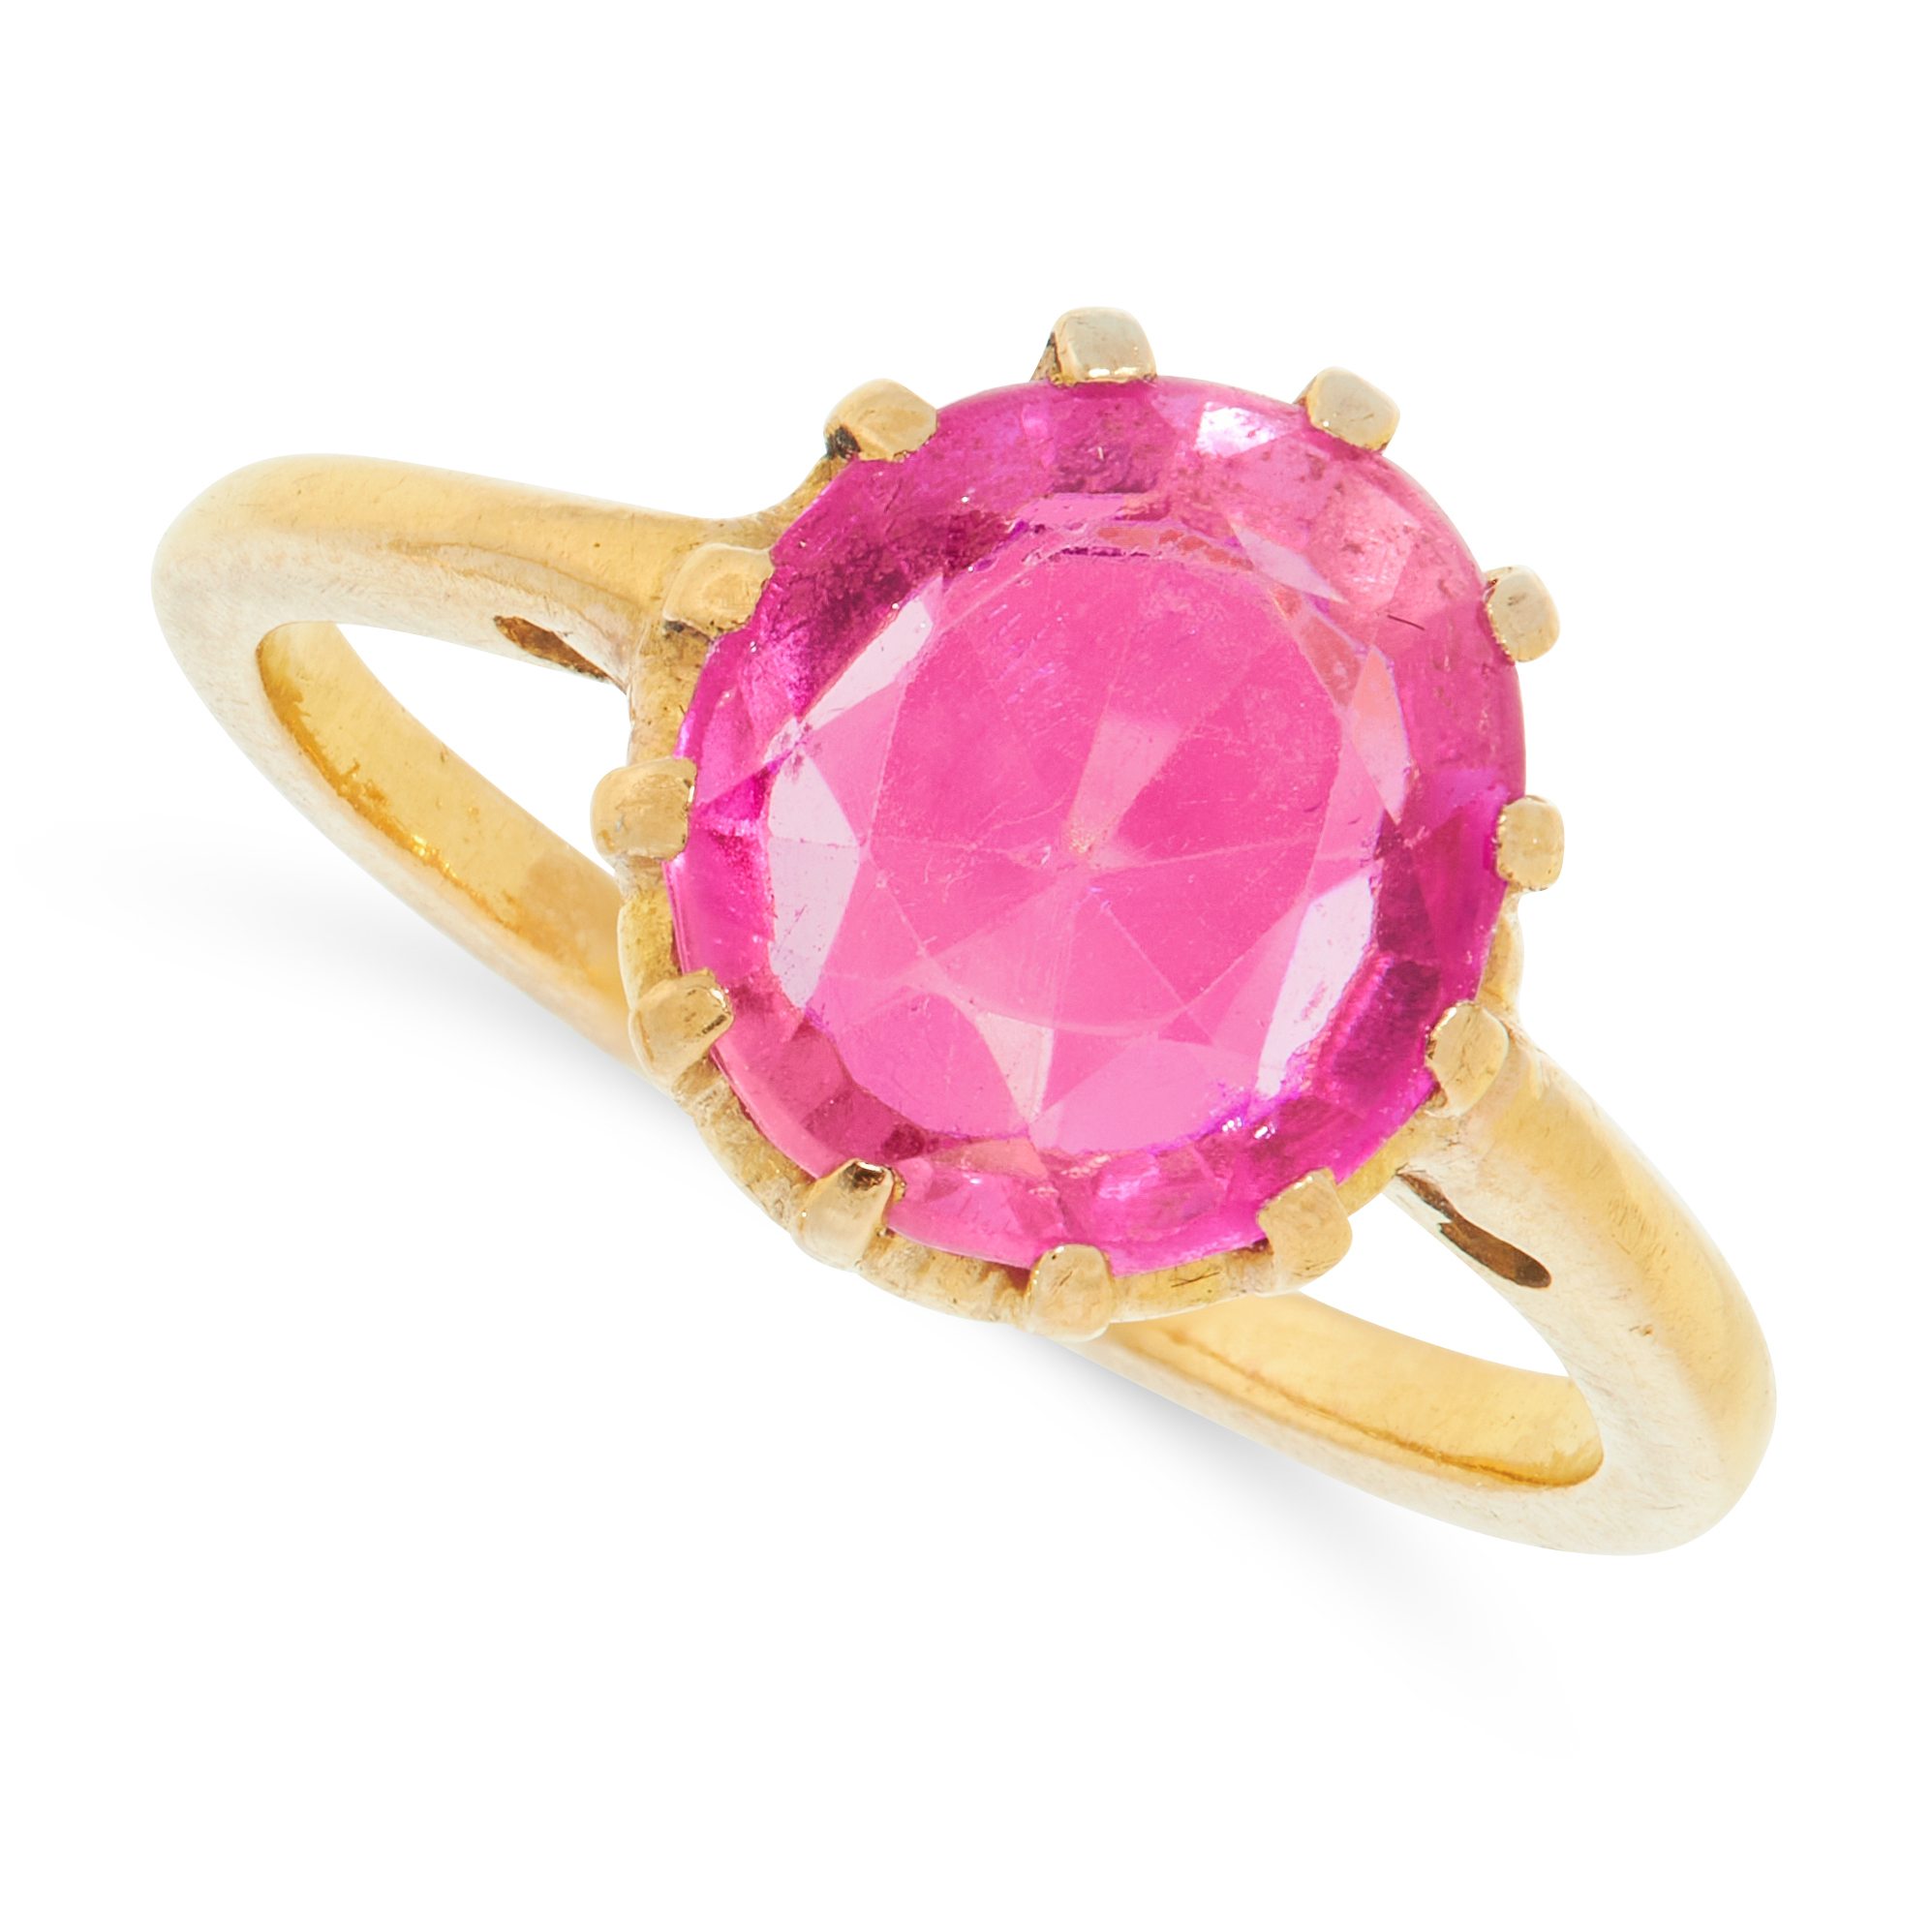 A GEMSET DRESS RING set with an oval cut pink gemstone in gold border, unmarked, size L / 6, 4.5g.